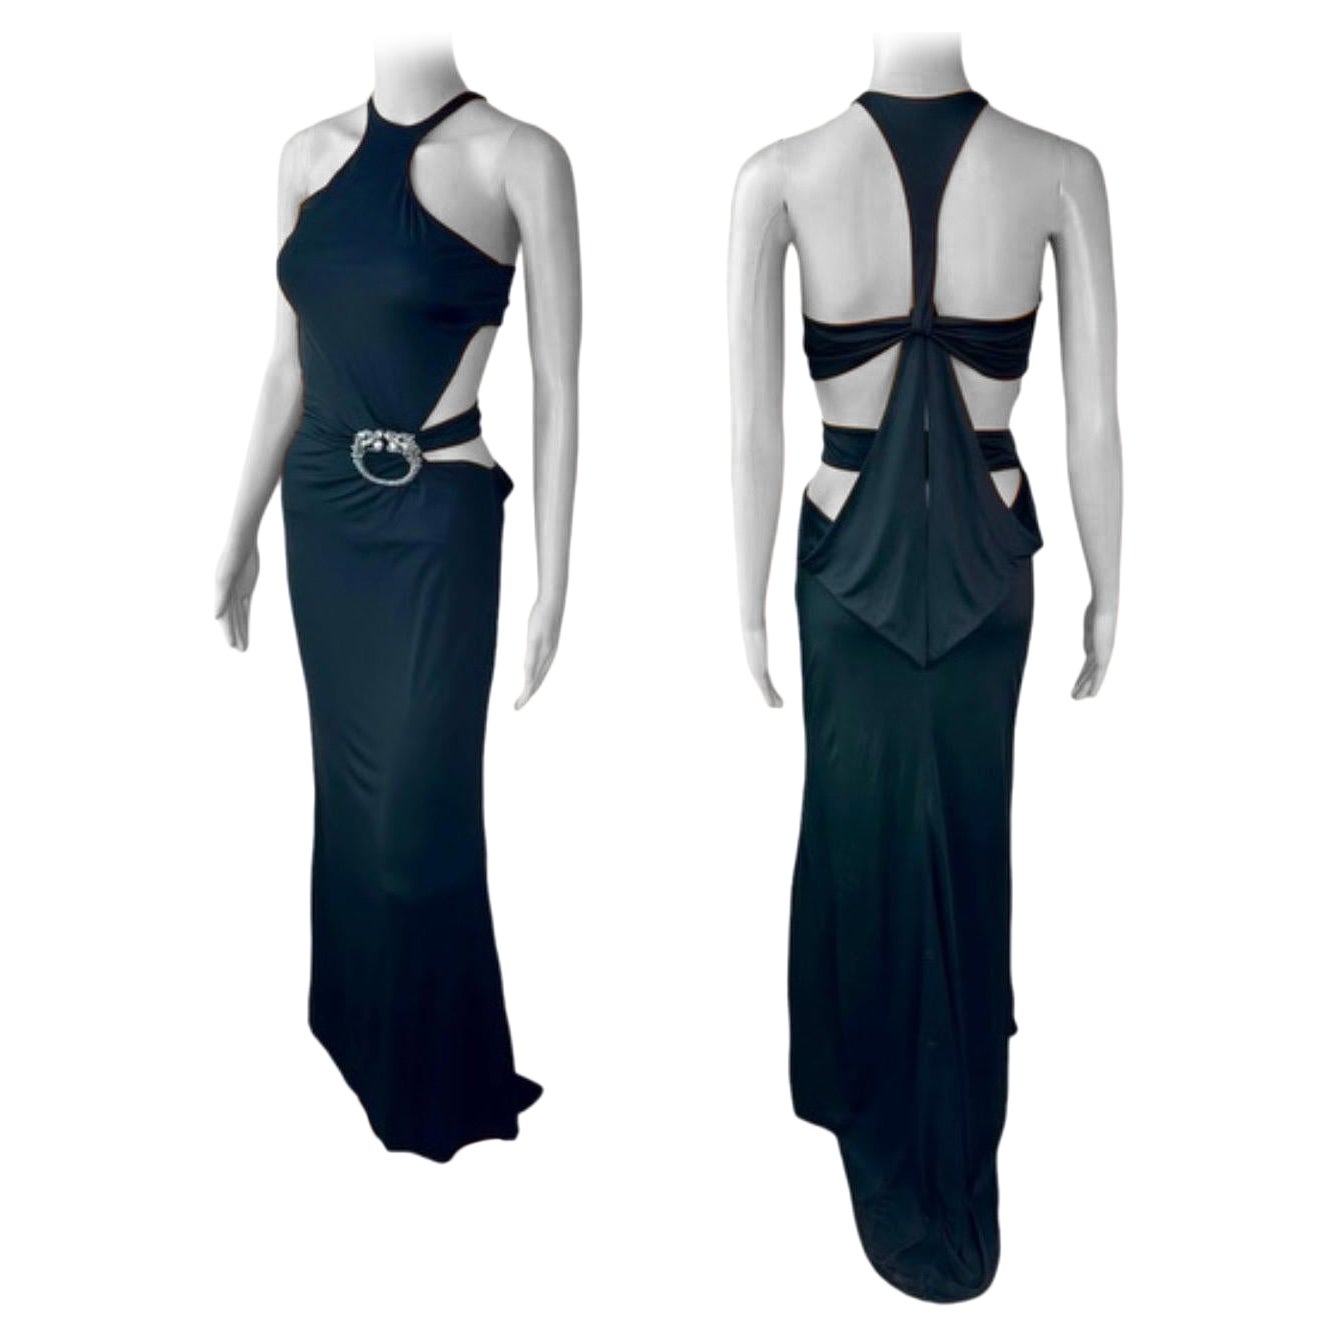 Tom Ford for Gucci F/W 2004 Embellished Plunging Cutout Black Evening Dress Gown For Sale